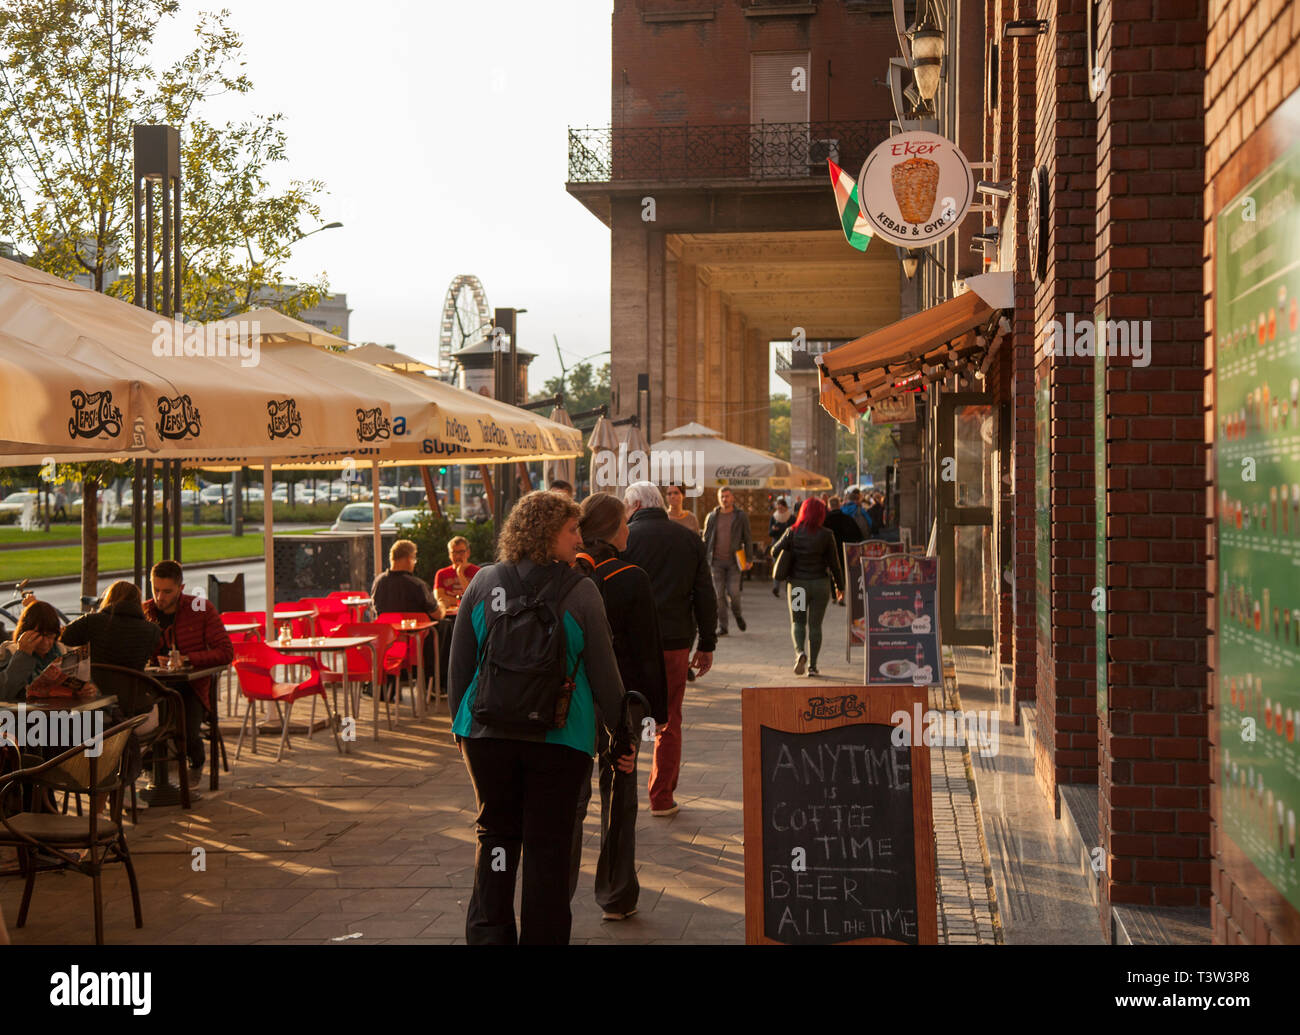 BUDAPEST, HUNGARY - SEPTEMBER 20, 2017: Budapest has many restaurant patios which attract people and tourists. Stock Photo